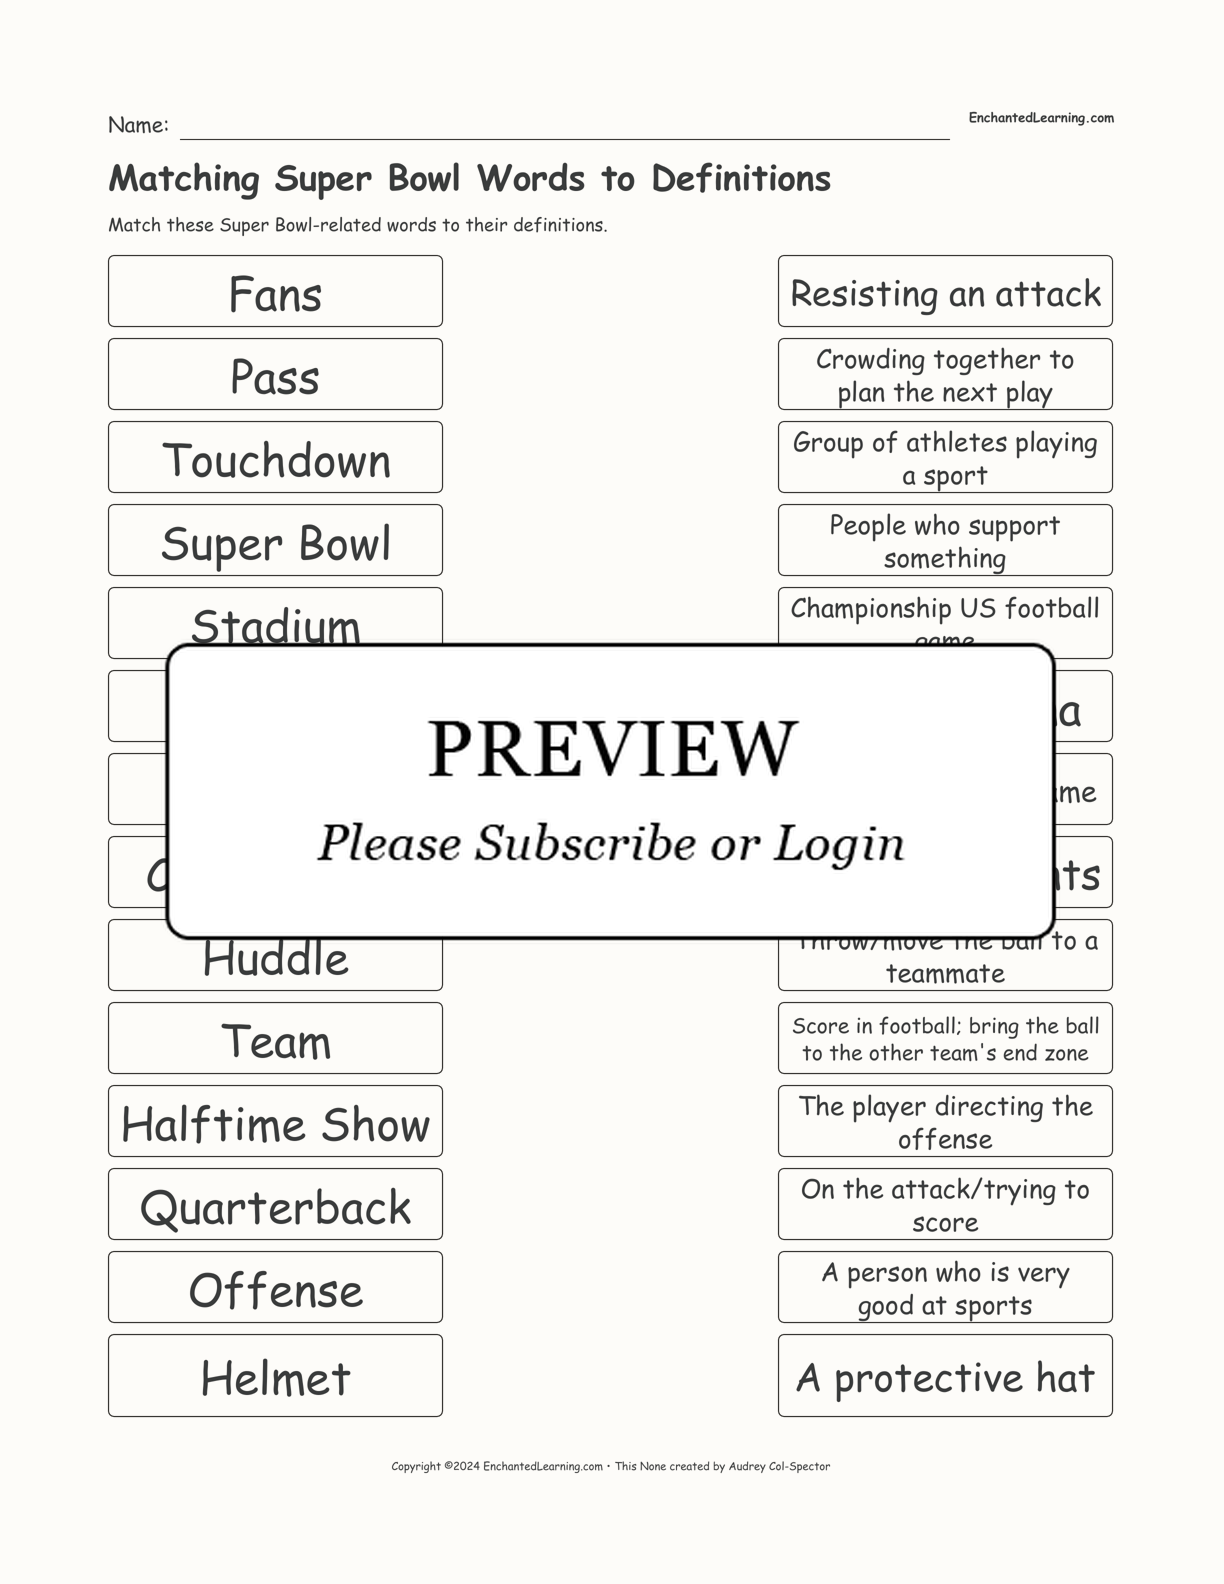 Matching Super Bowl Words to Definitions interactive worksheet page 1